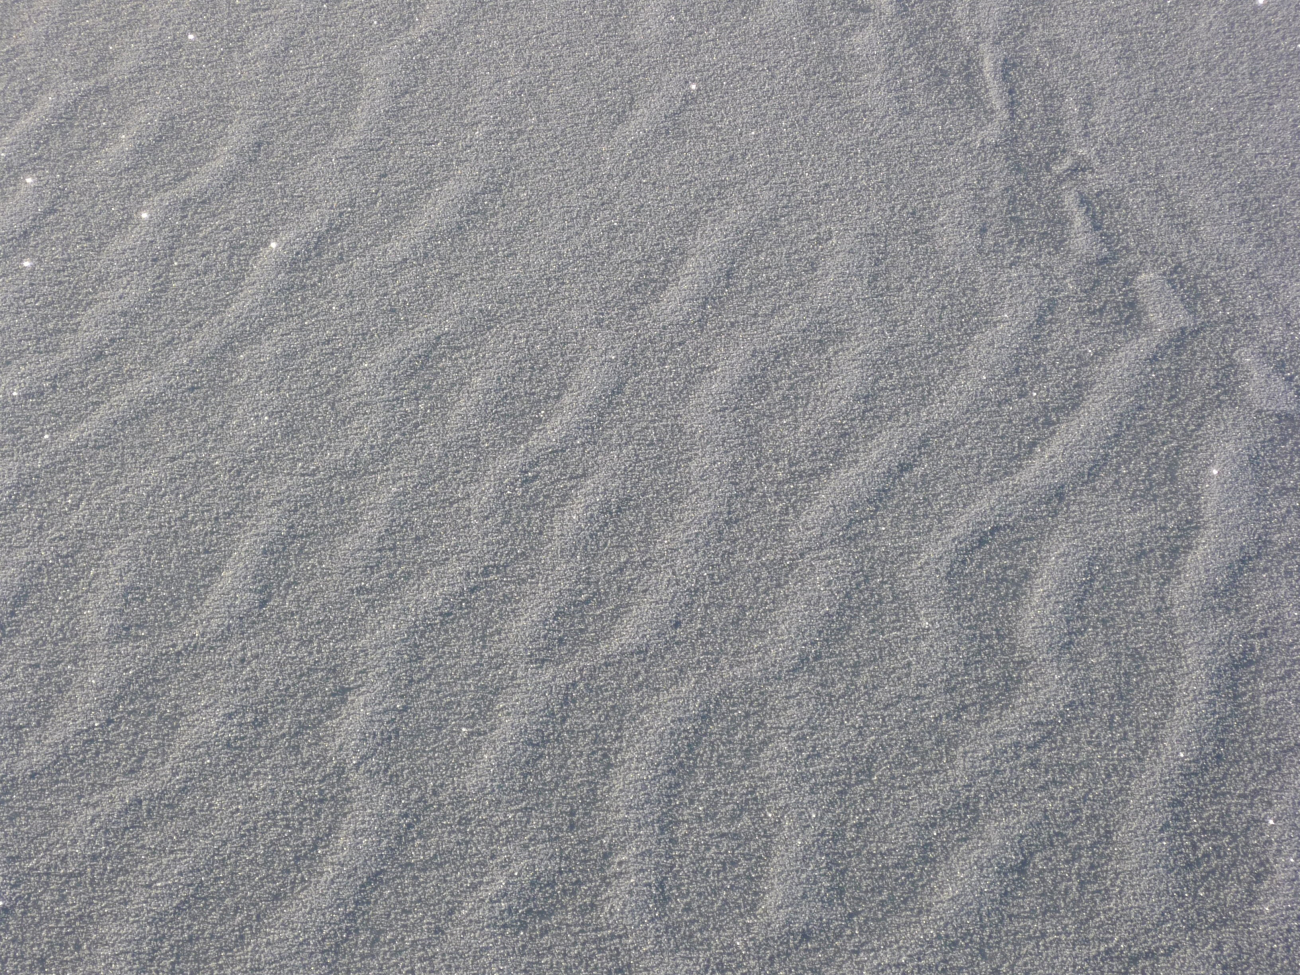 Dune-like structures in graupel covering the ice surface